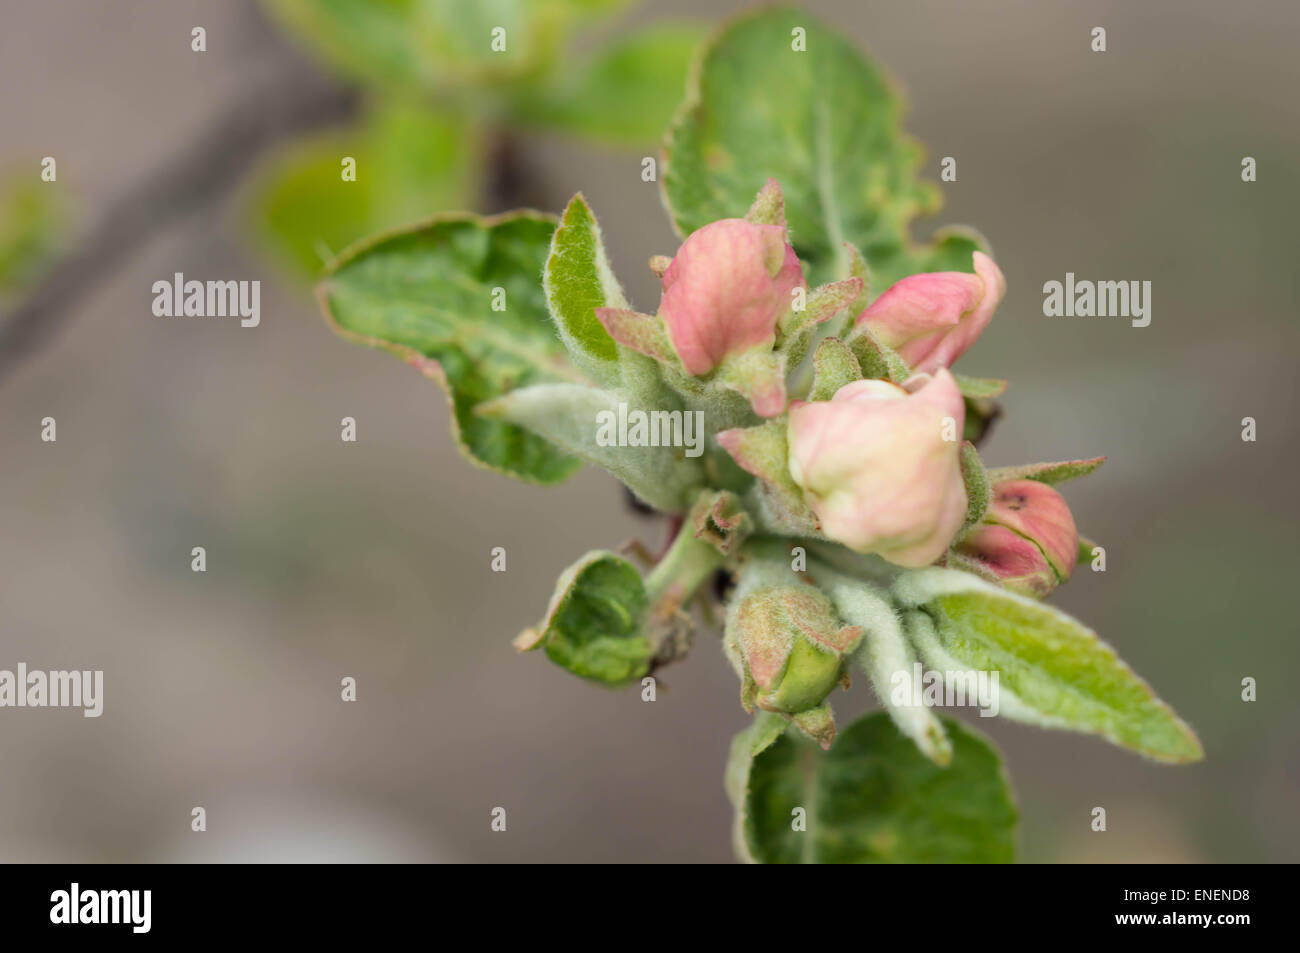 Buds of flowers on an apple-tree Stock Photo